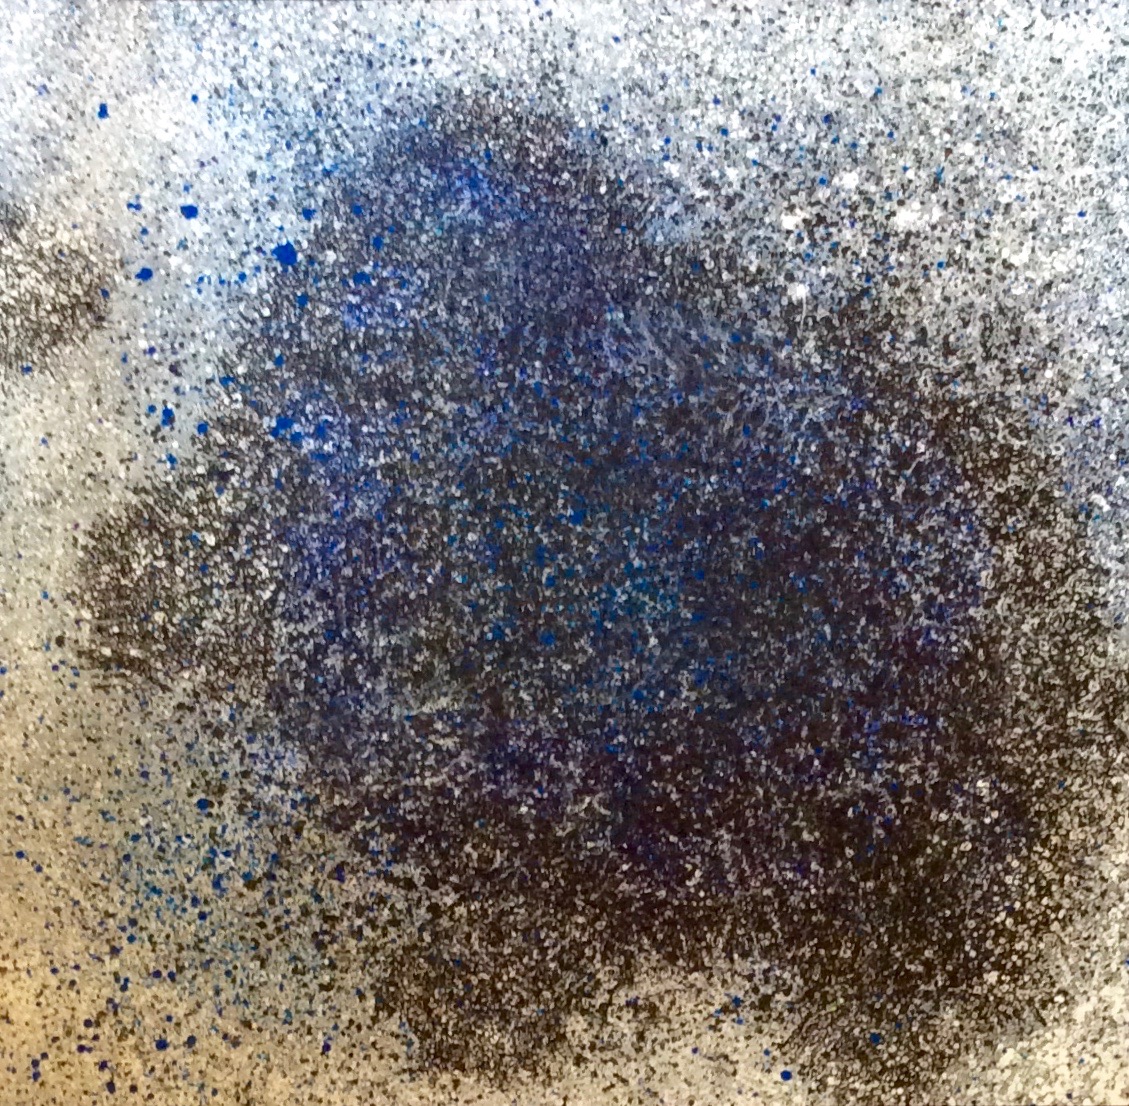  Blue Particles, 2018 59 x 61 inches Acrylic on 2/8”closed cell black foam 